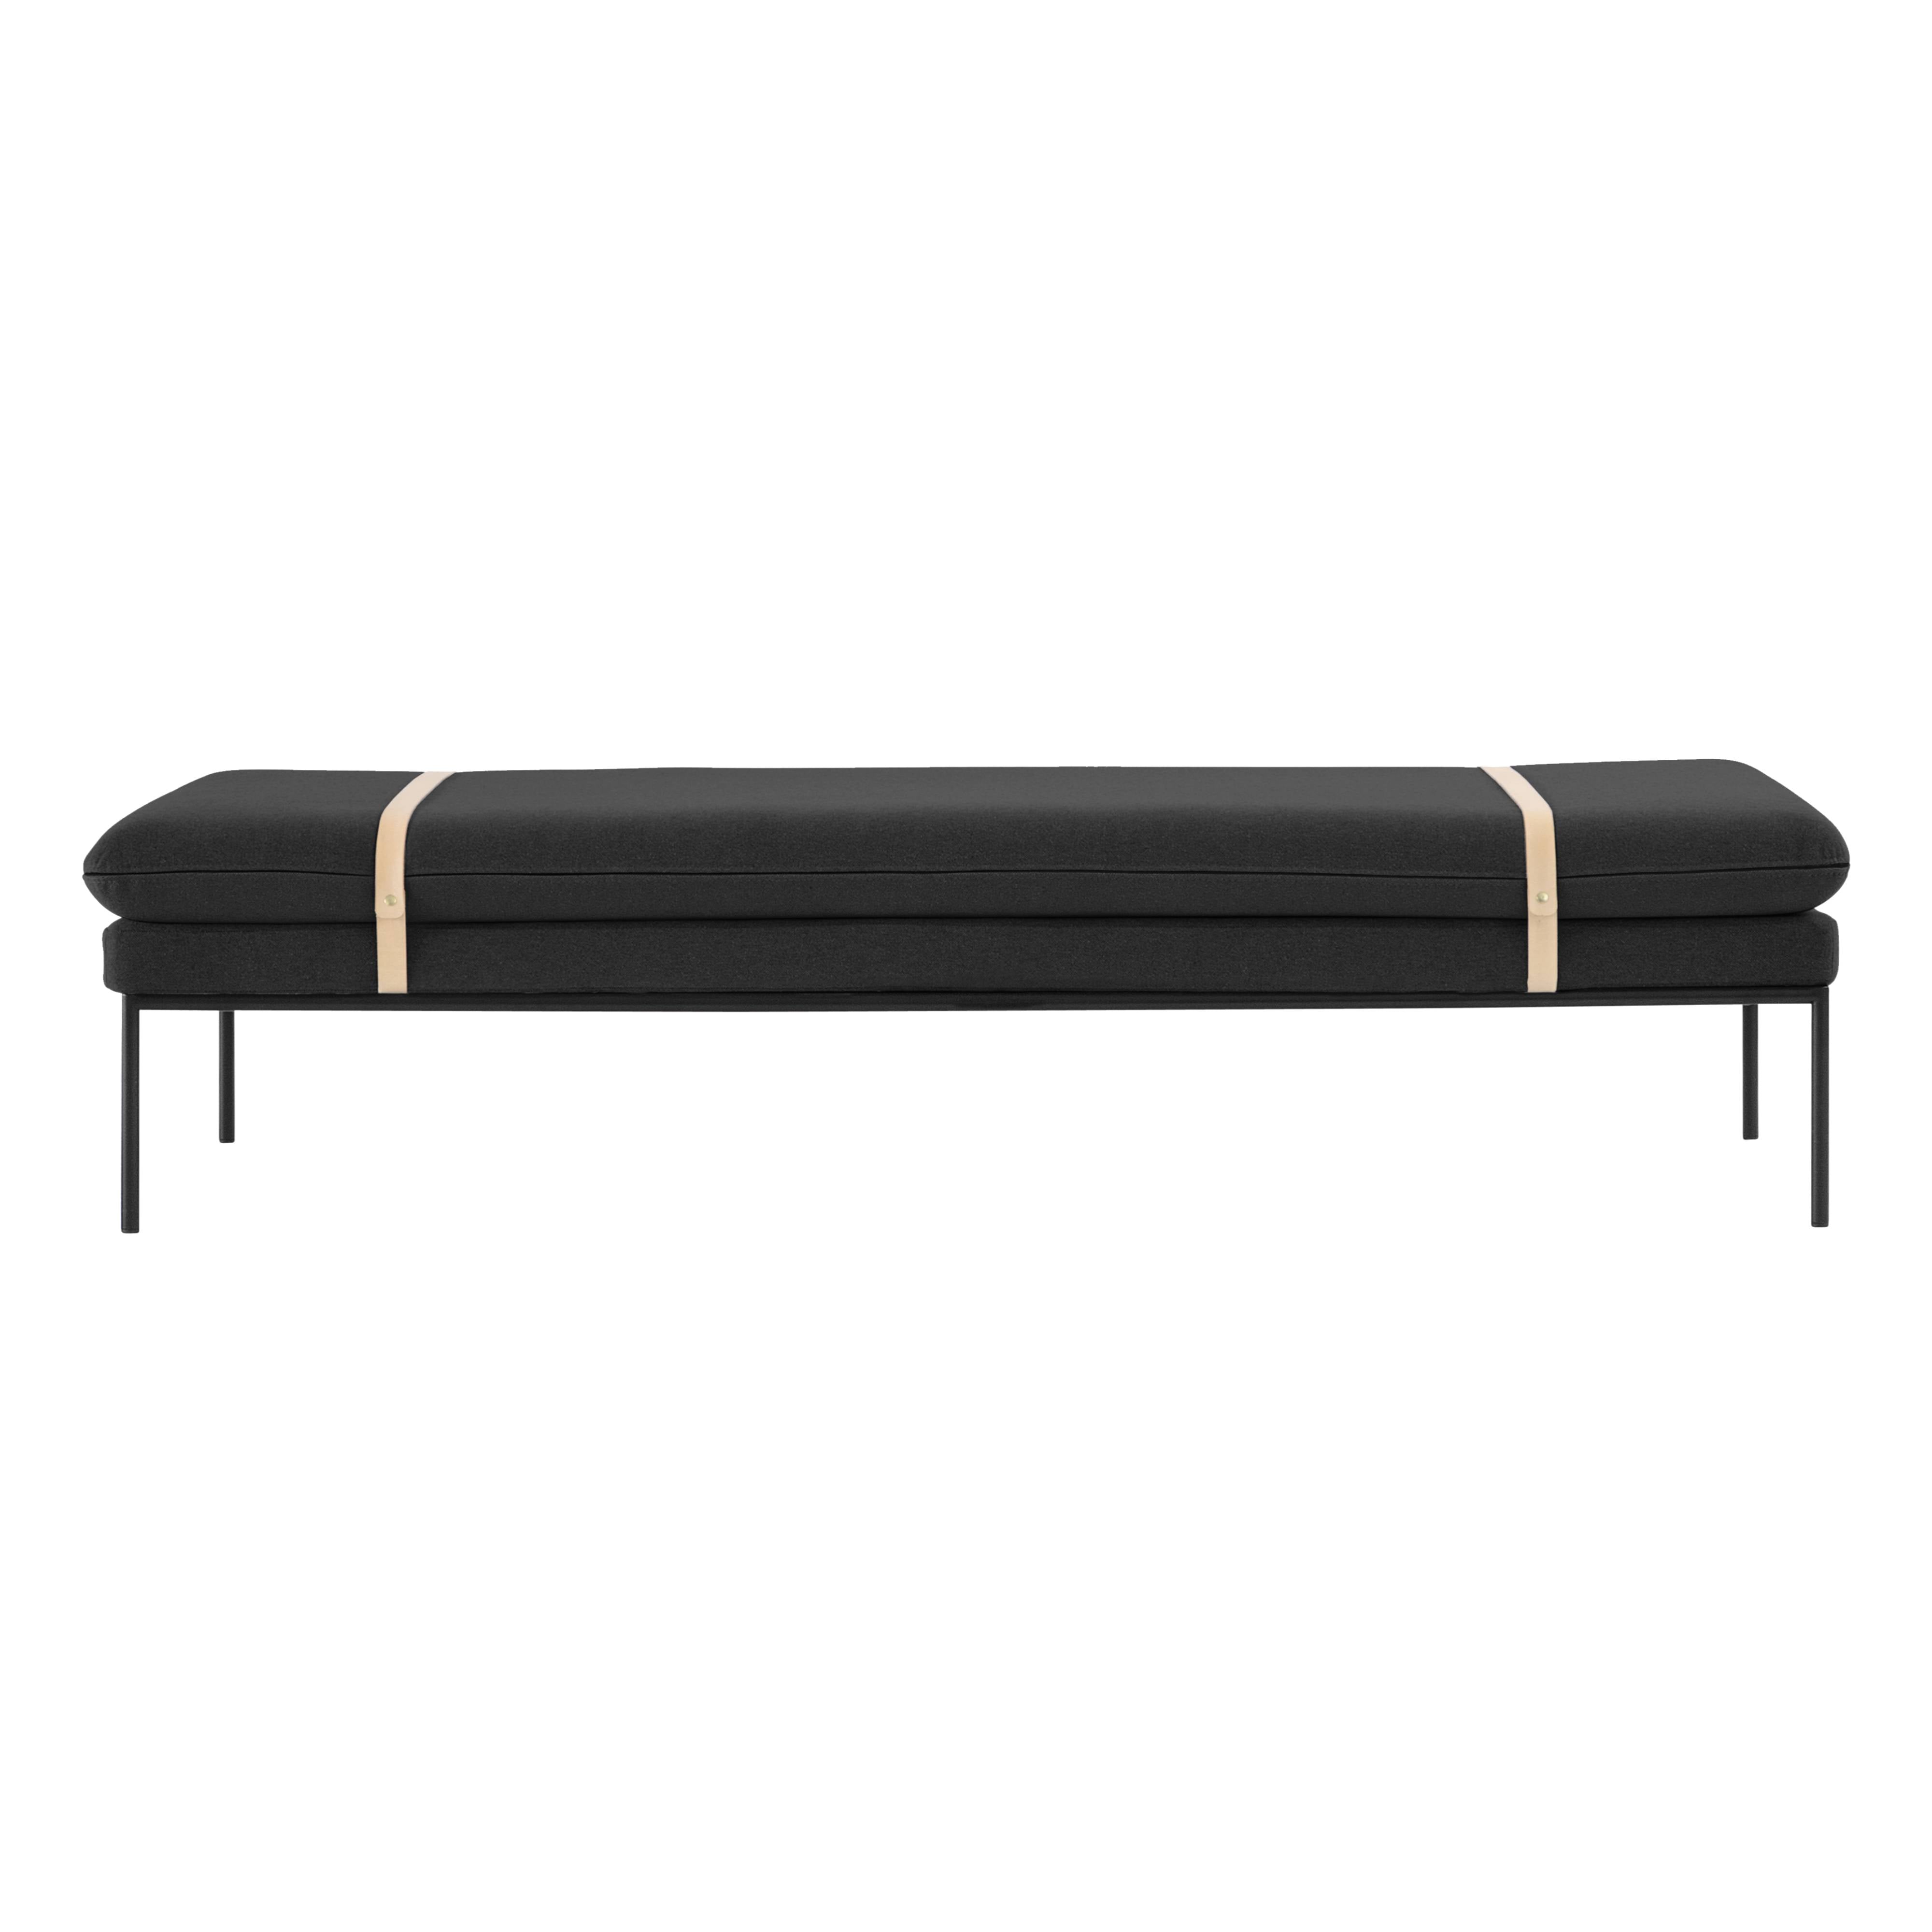 Turn Daybed: Black + With Natural Strap